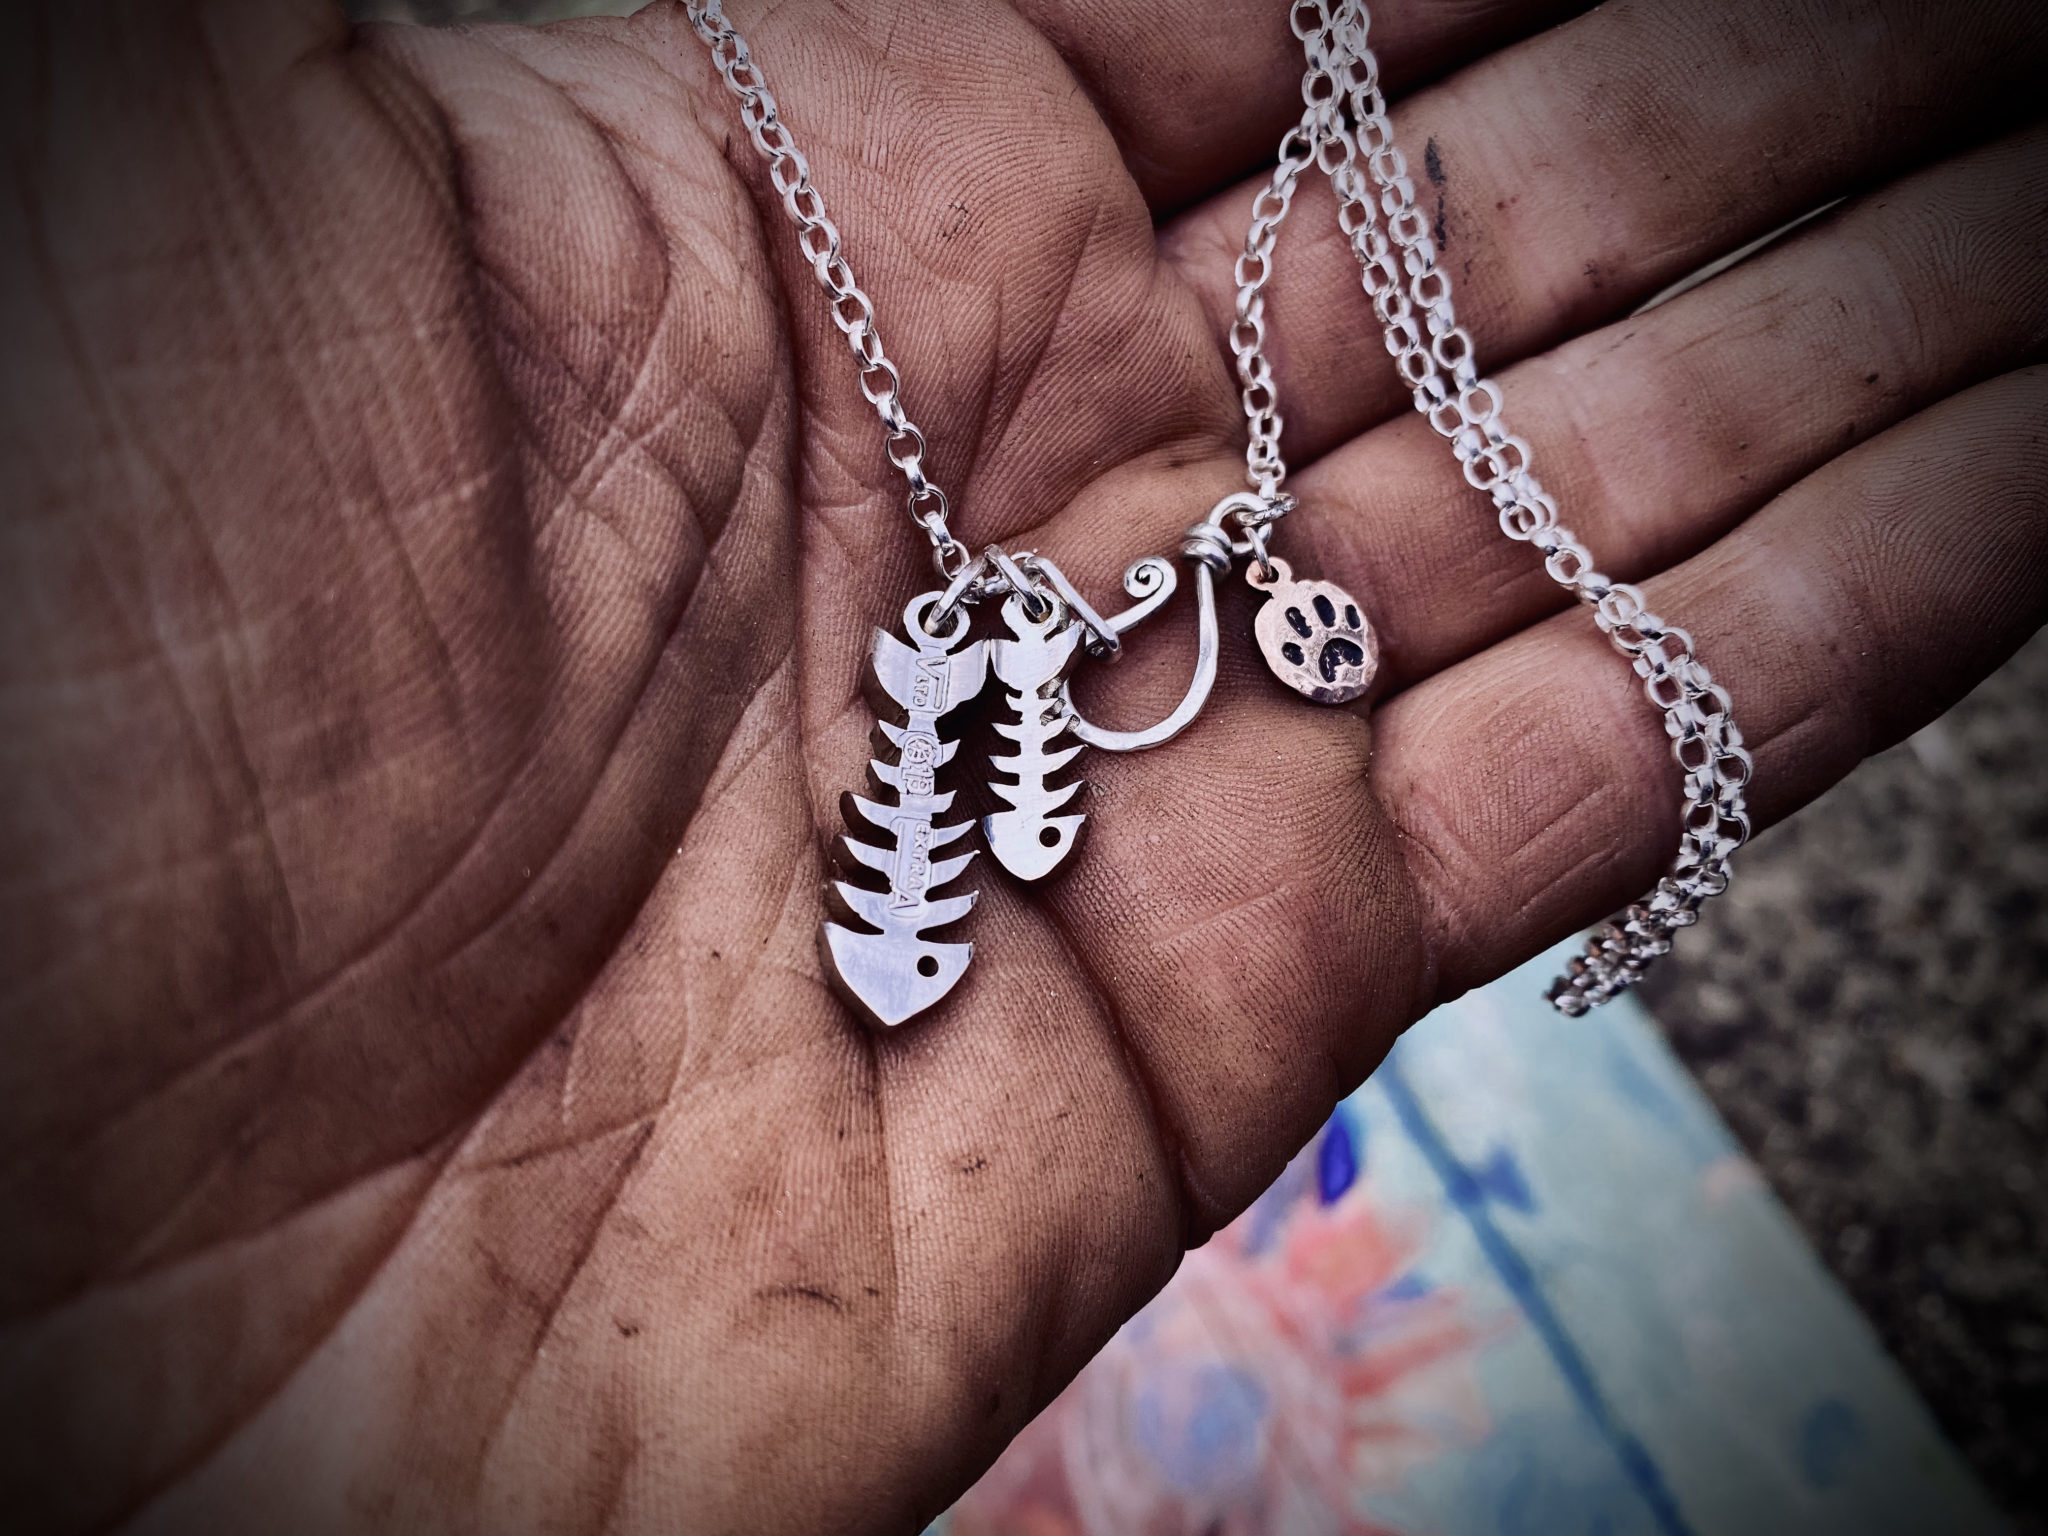 handmade, ethical surfer jewellery made from completely recycled raw materials. fishbone jewelry